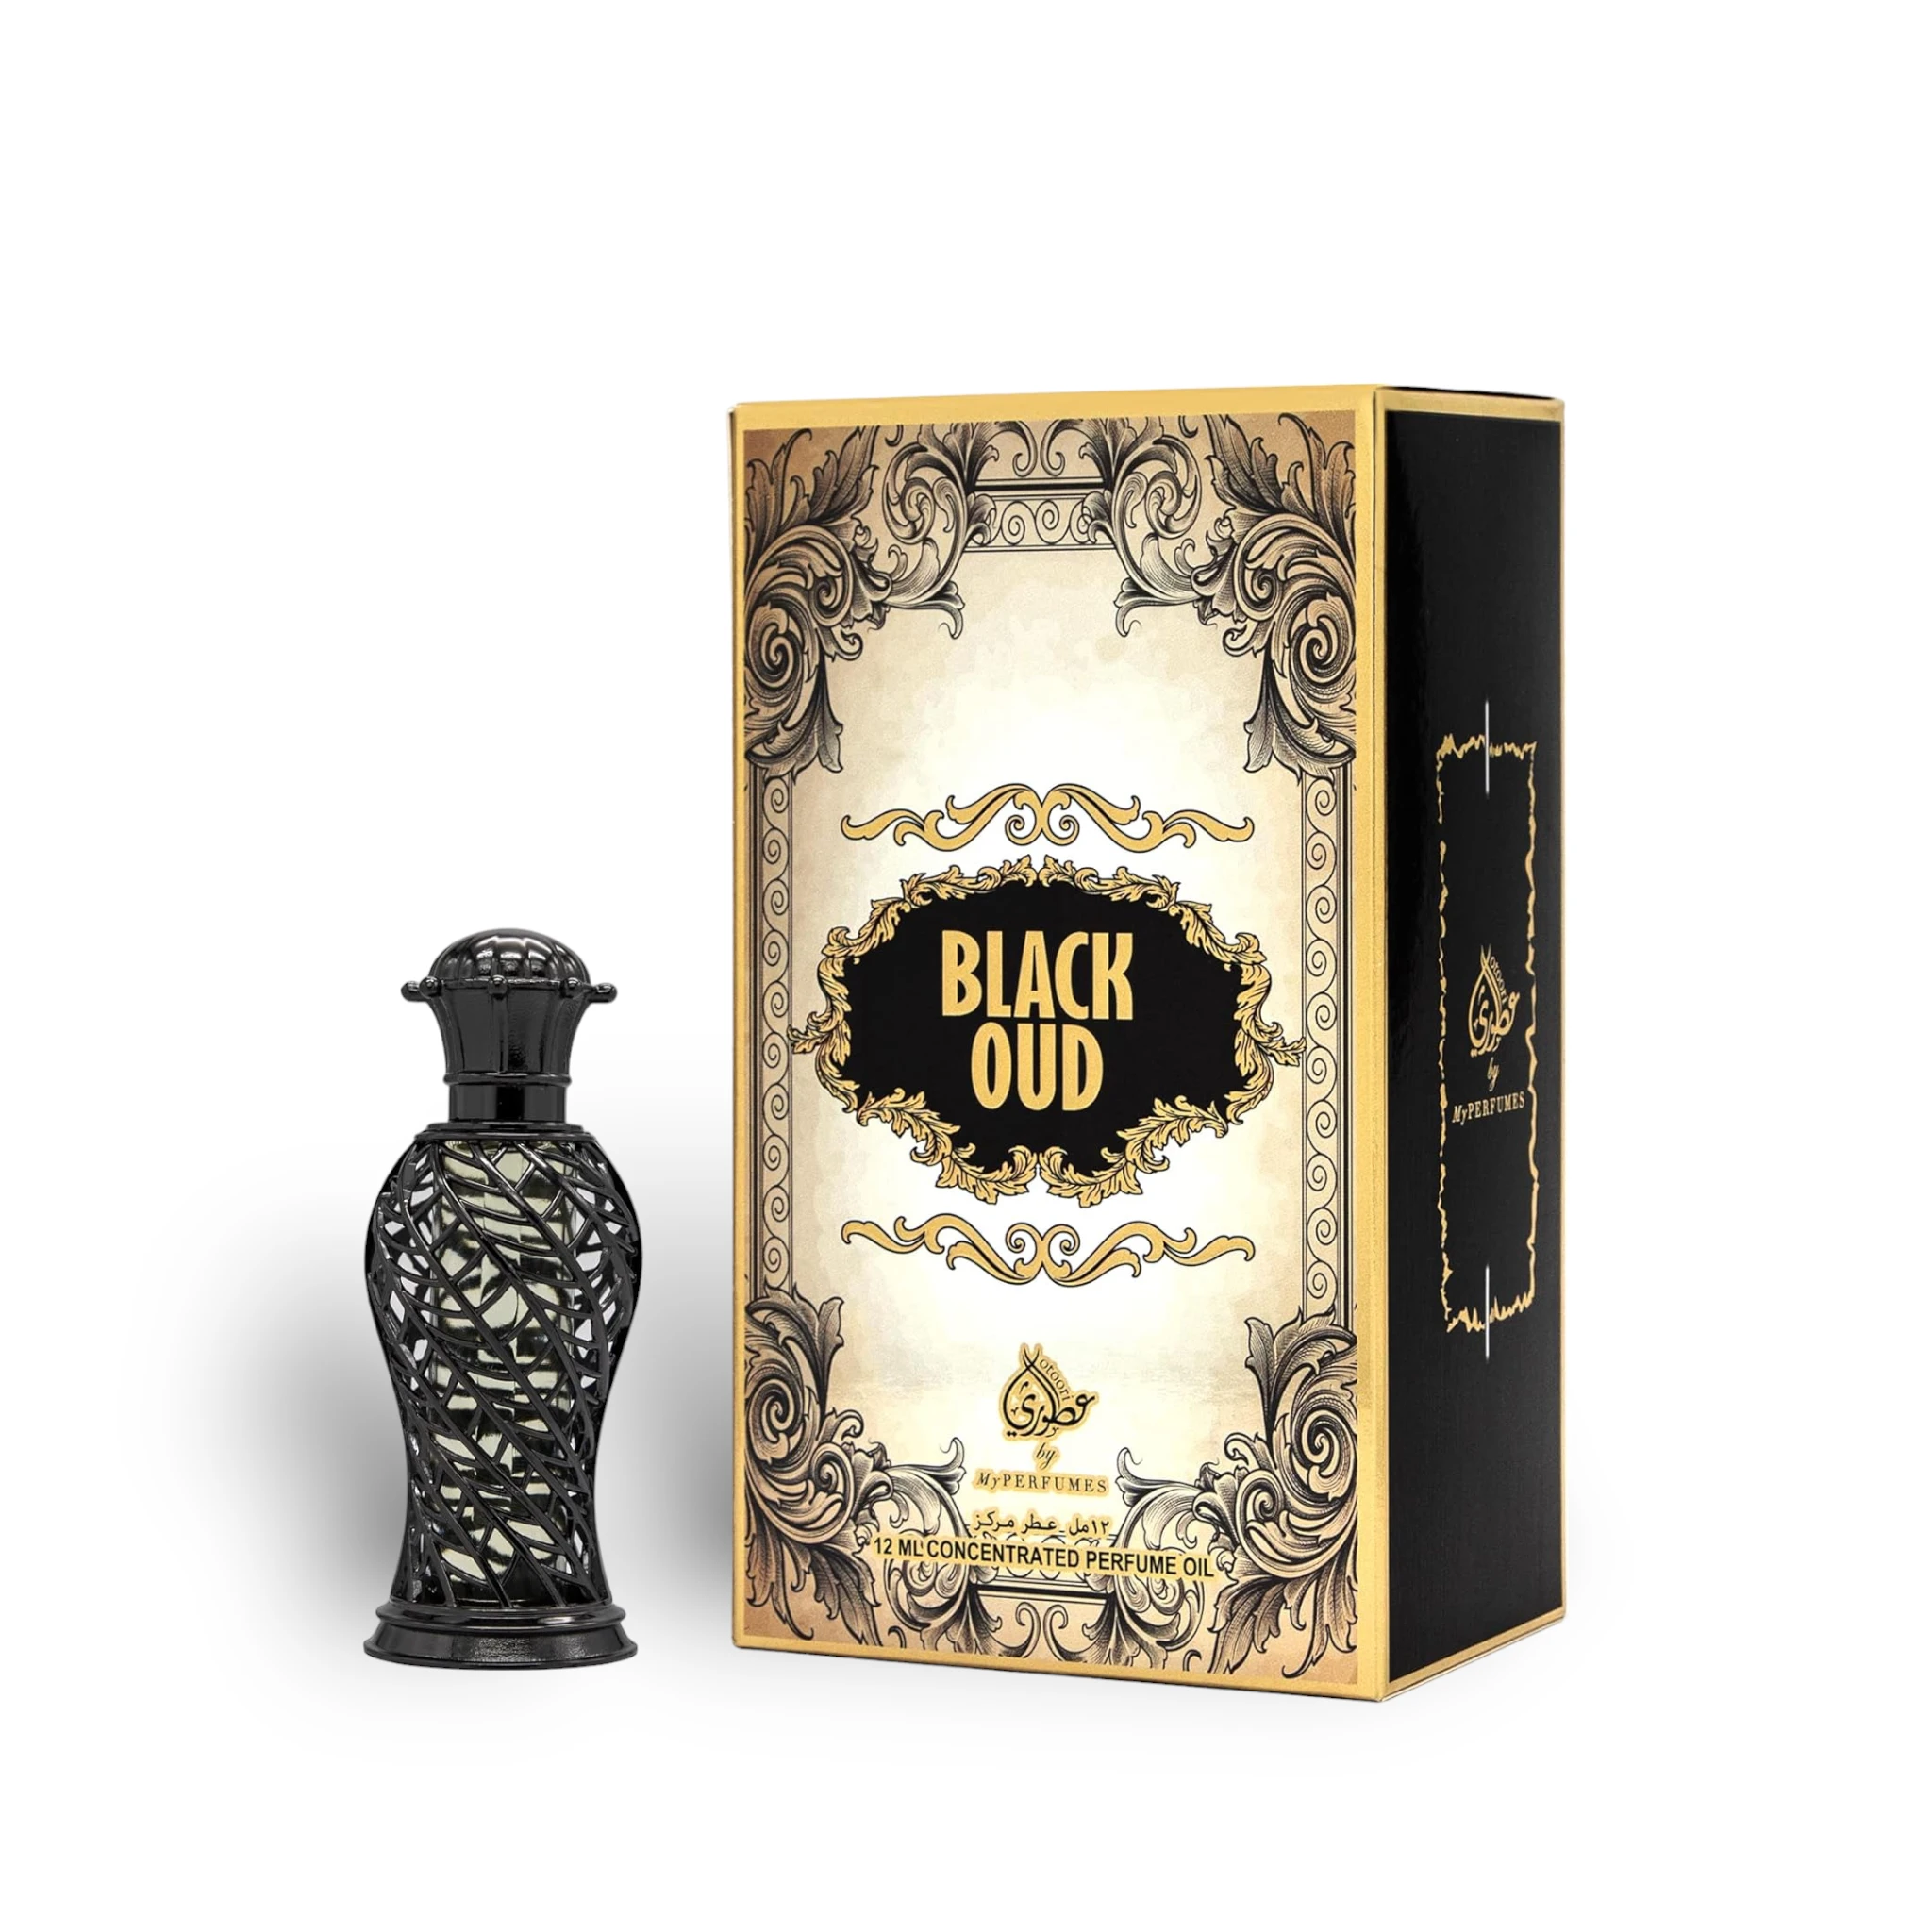 Black Oud Oud Aswad Concentrated Perfume Oil Attar 12Ml By Otoori (My Perfumes)